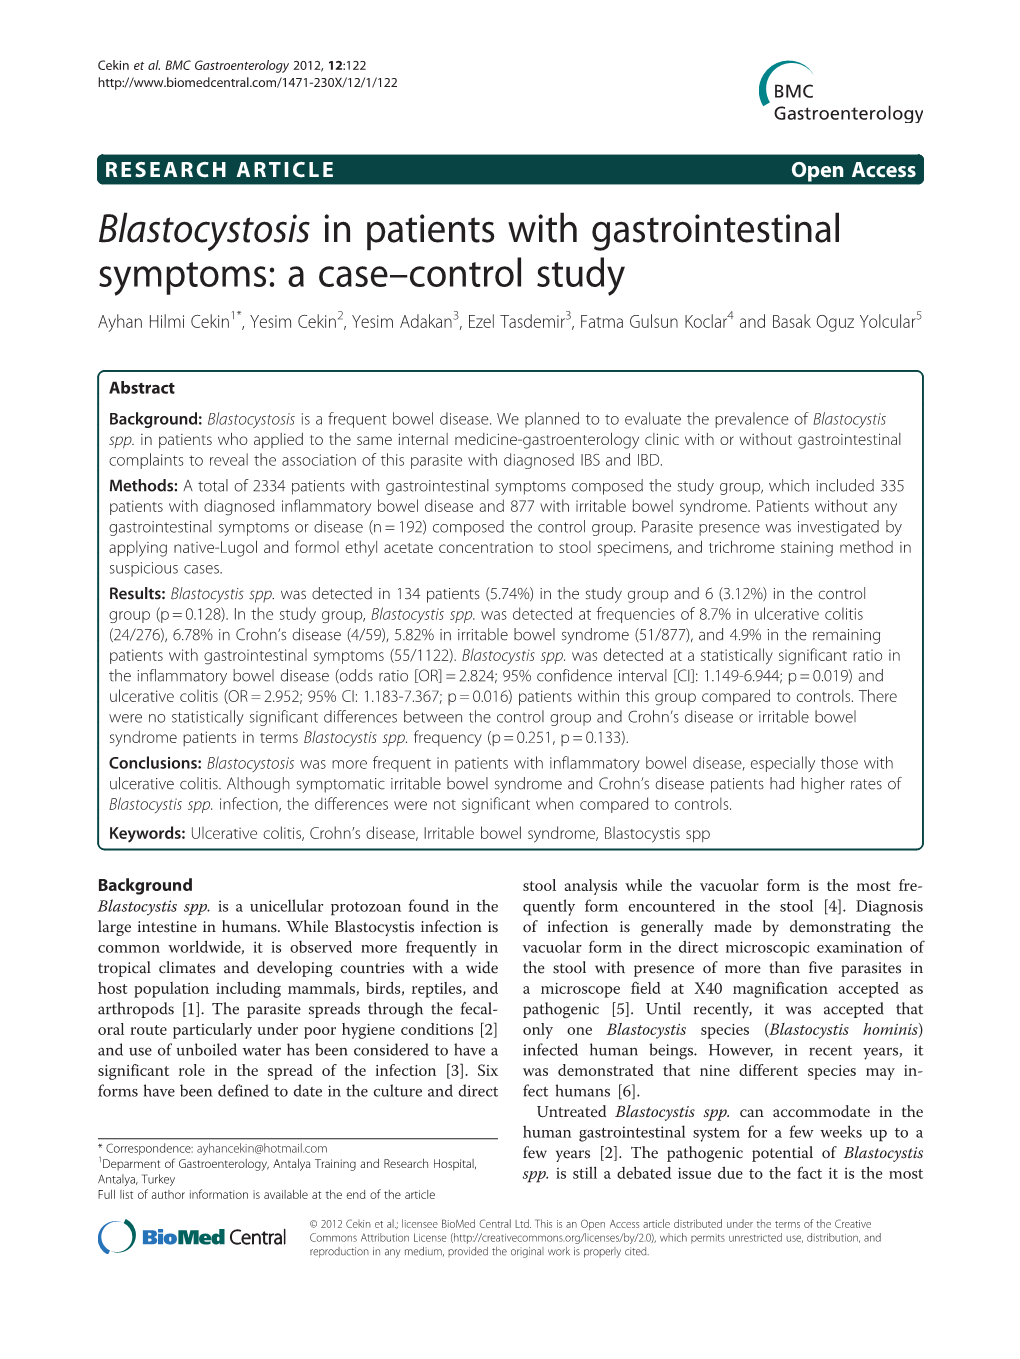 Blastocystosis in Patients with Gastrointestinal Symptoms: a Case